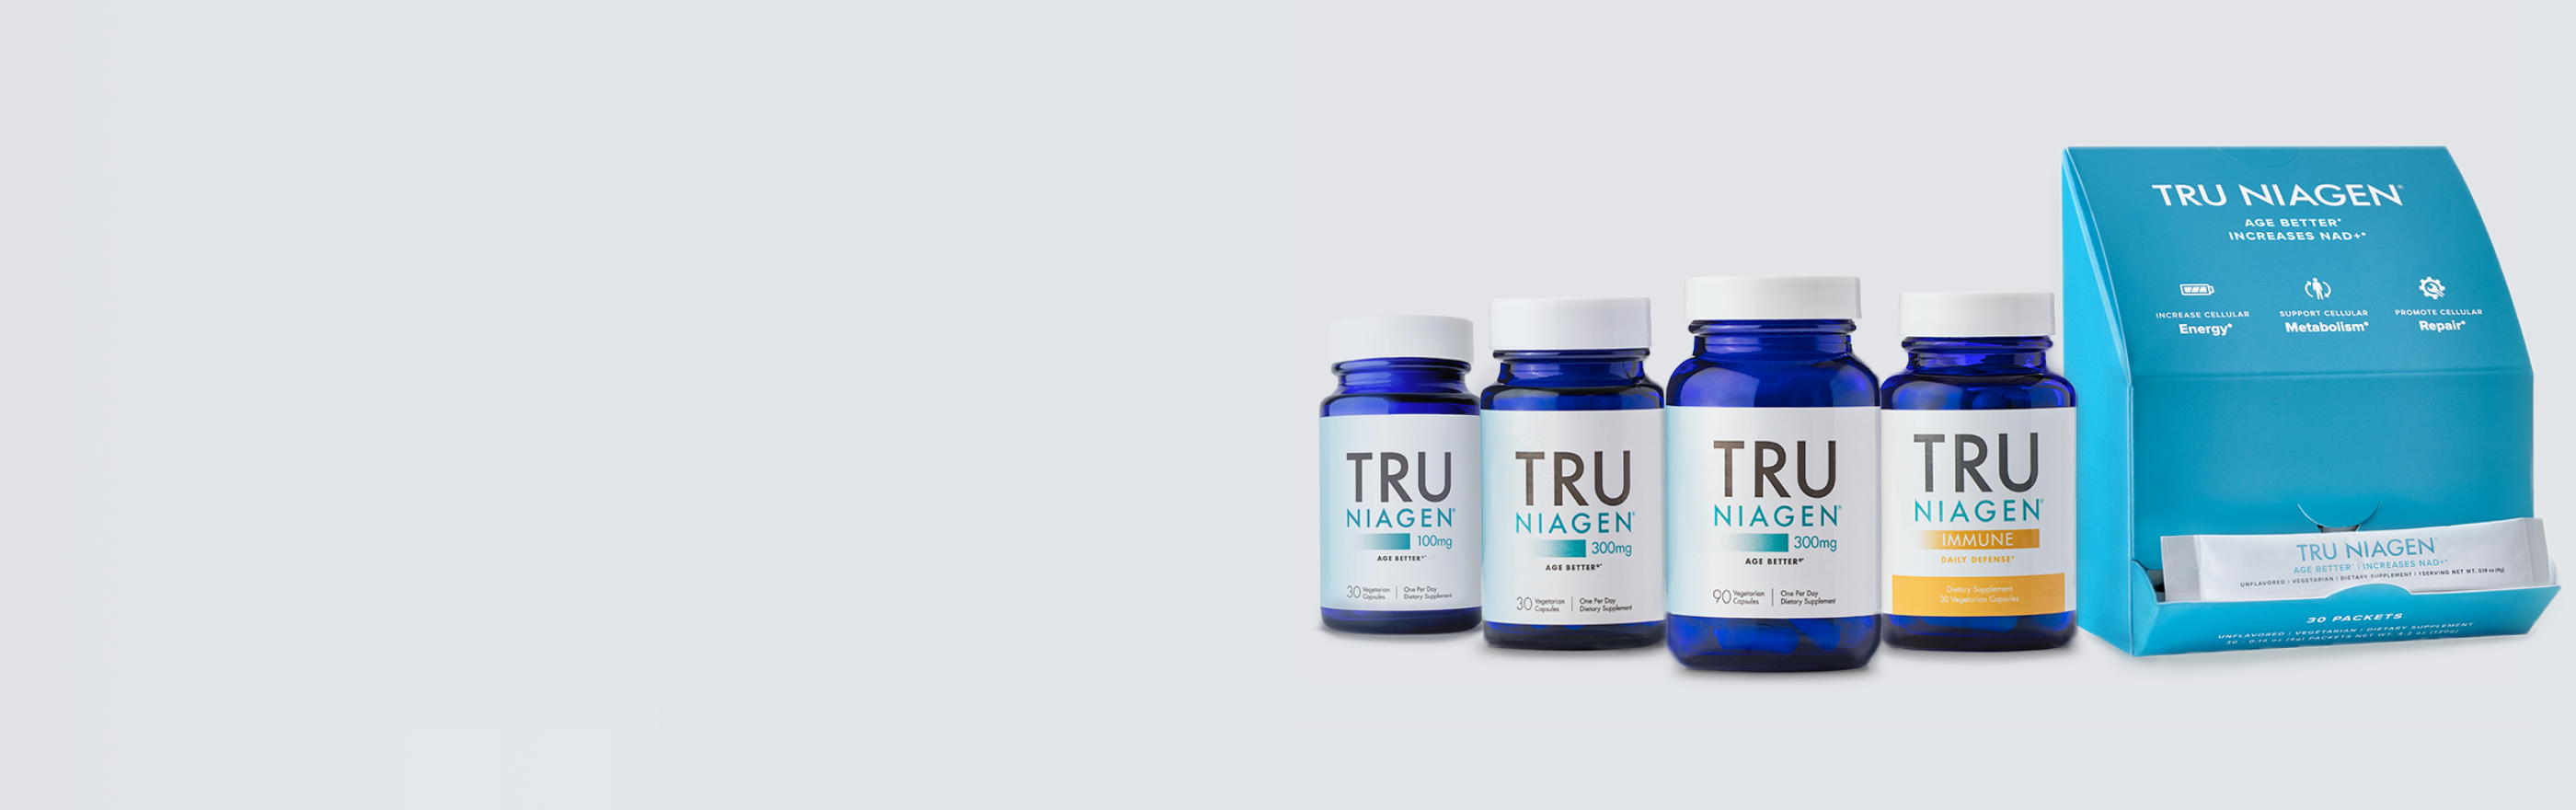 Tru Niagen 300 mg in two bottle sizes and in stick pack form